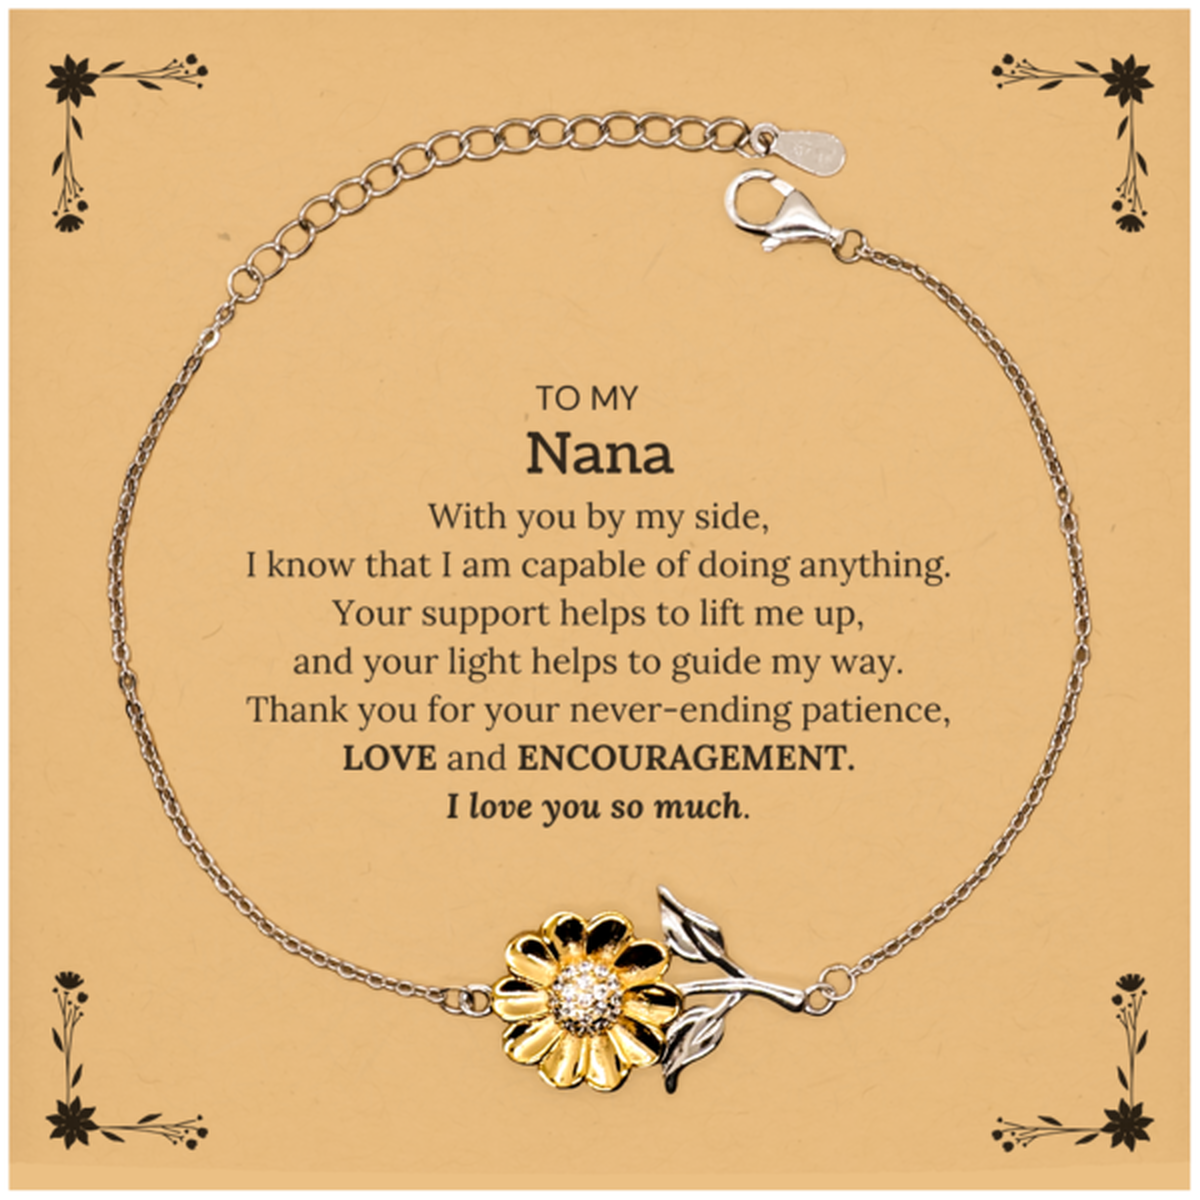 Appreciation Nana Sunflower Bracelet Gifts, To My Nana Birthday Christmas Wedding Keepsake Gifts for Nana With you by my side, I know that I am capable of doing anything. I love you so much